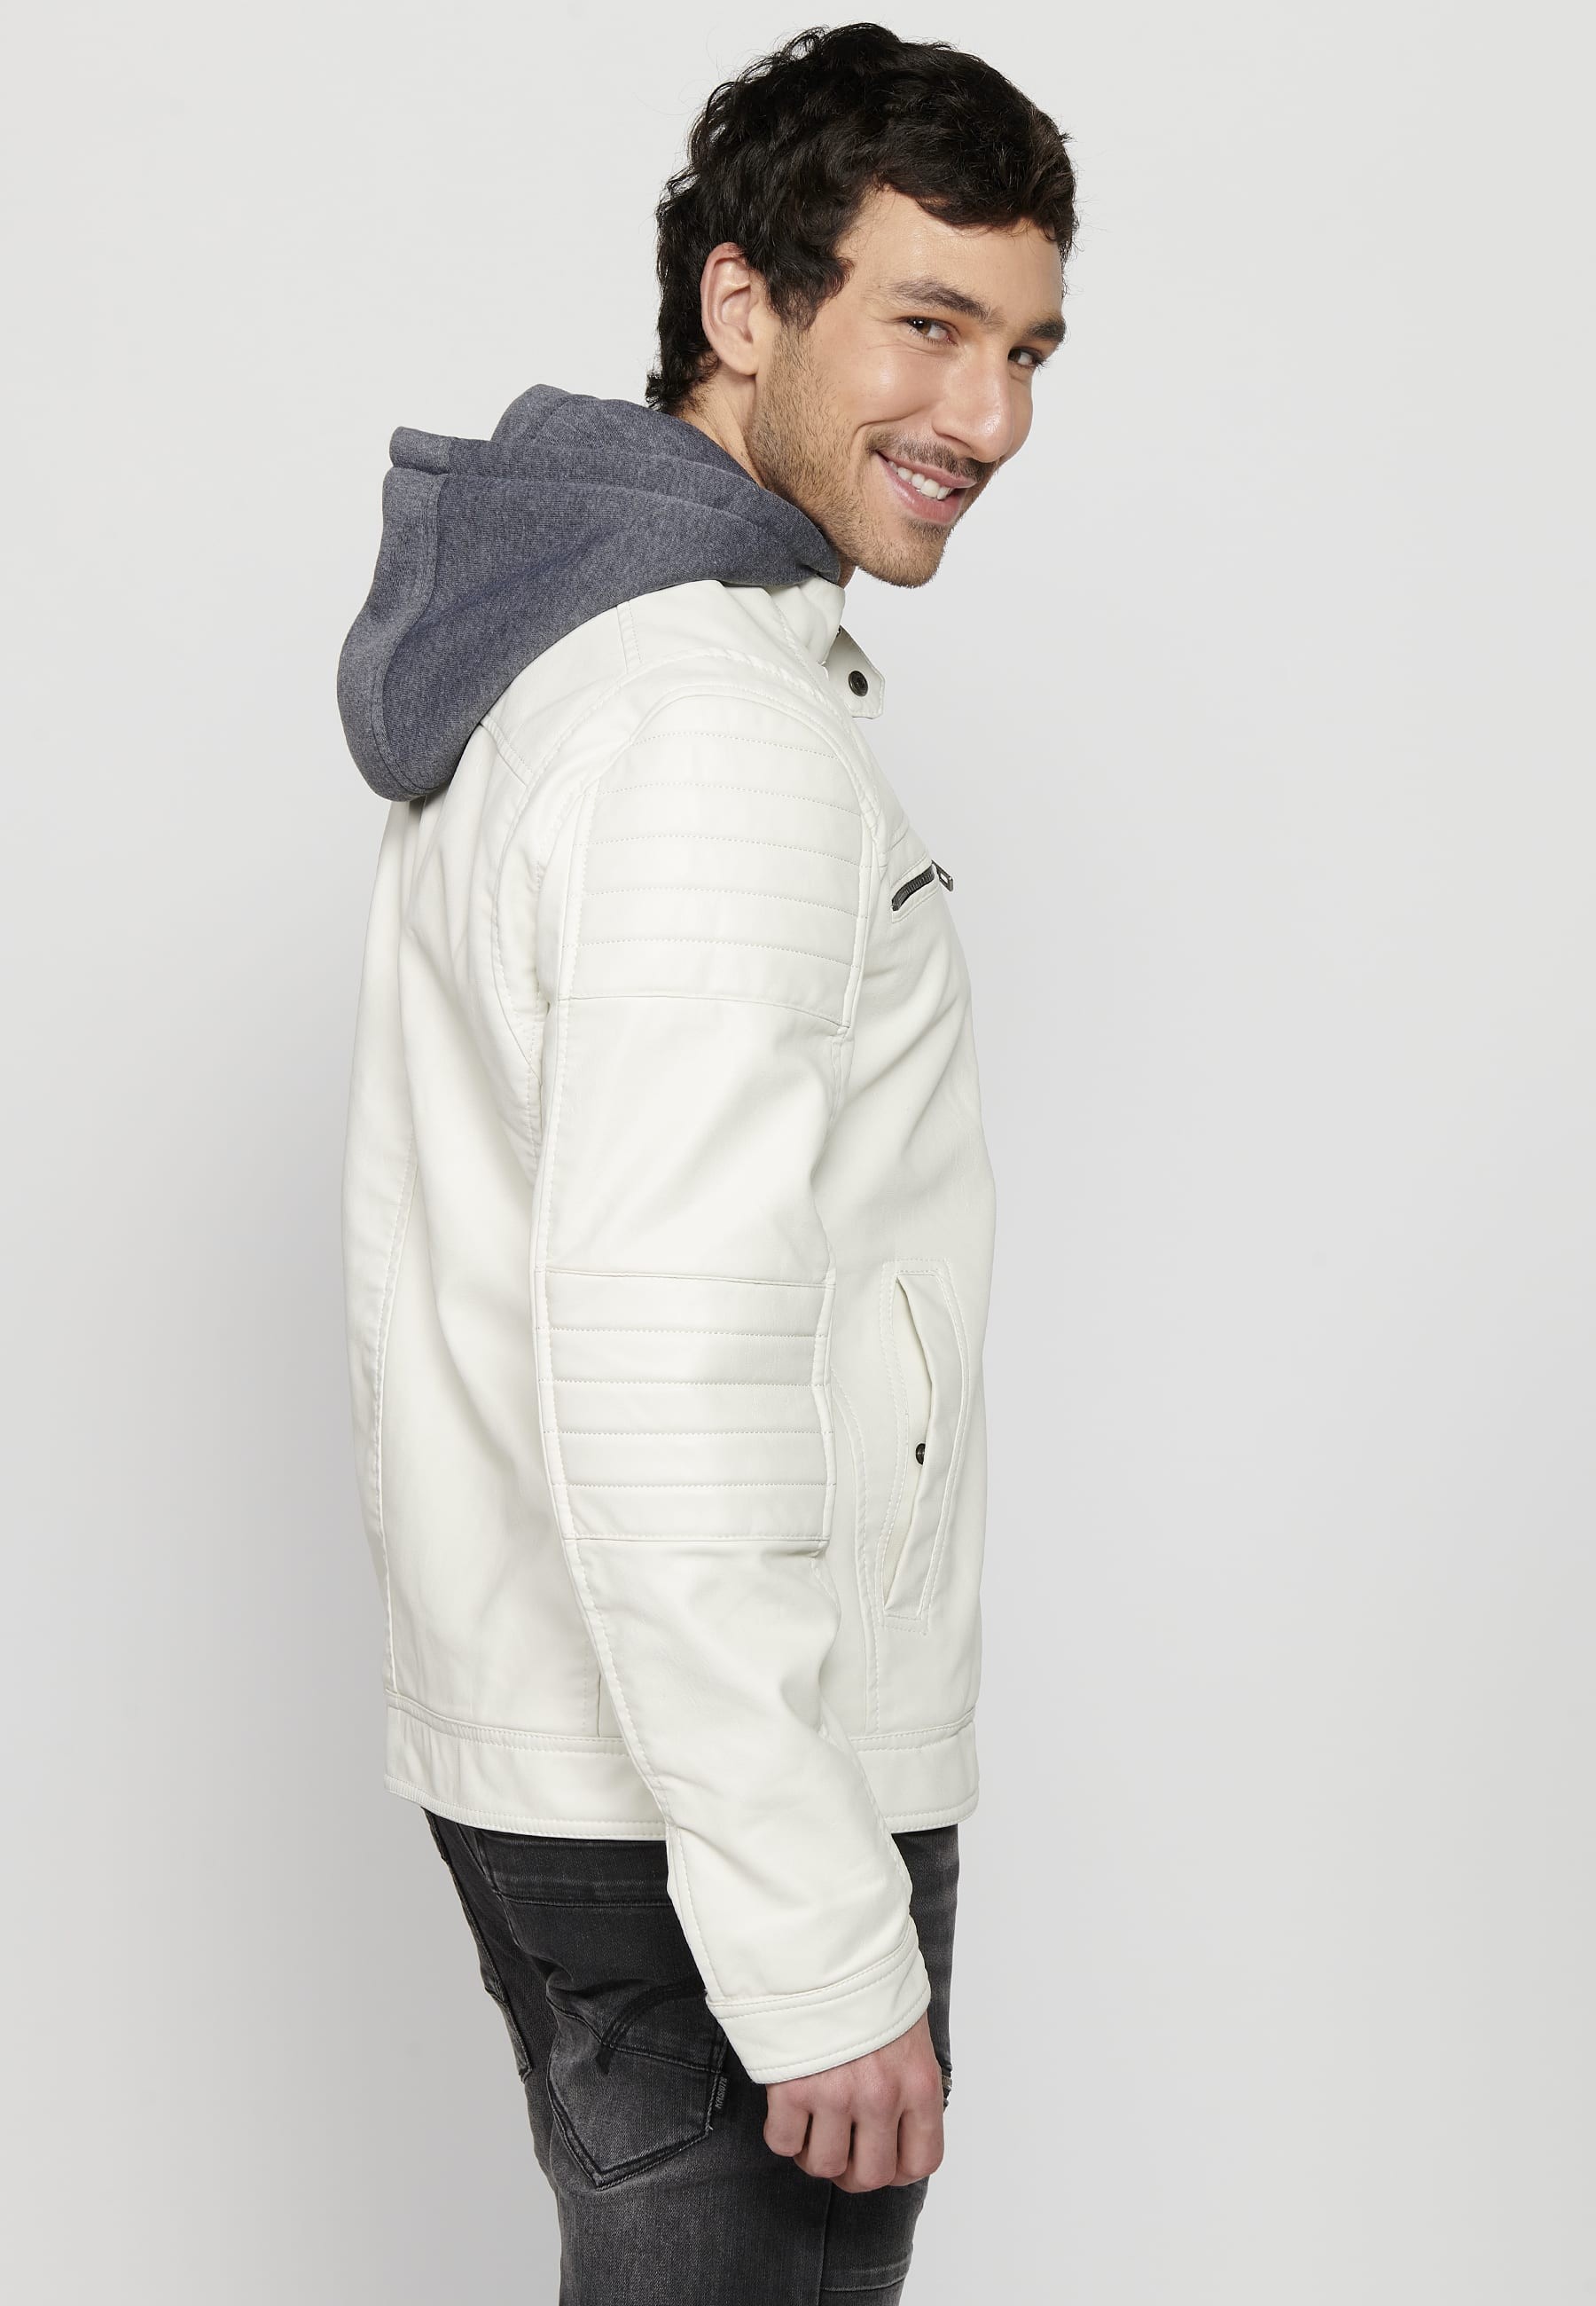 Long-sleeved jacket with zipper front closure and adjustable detachable hooded collar with drawstring in Ecru for Men 6